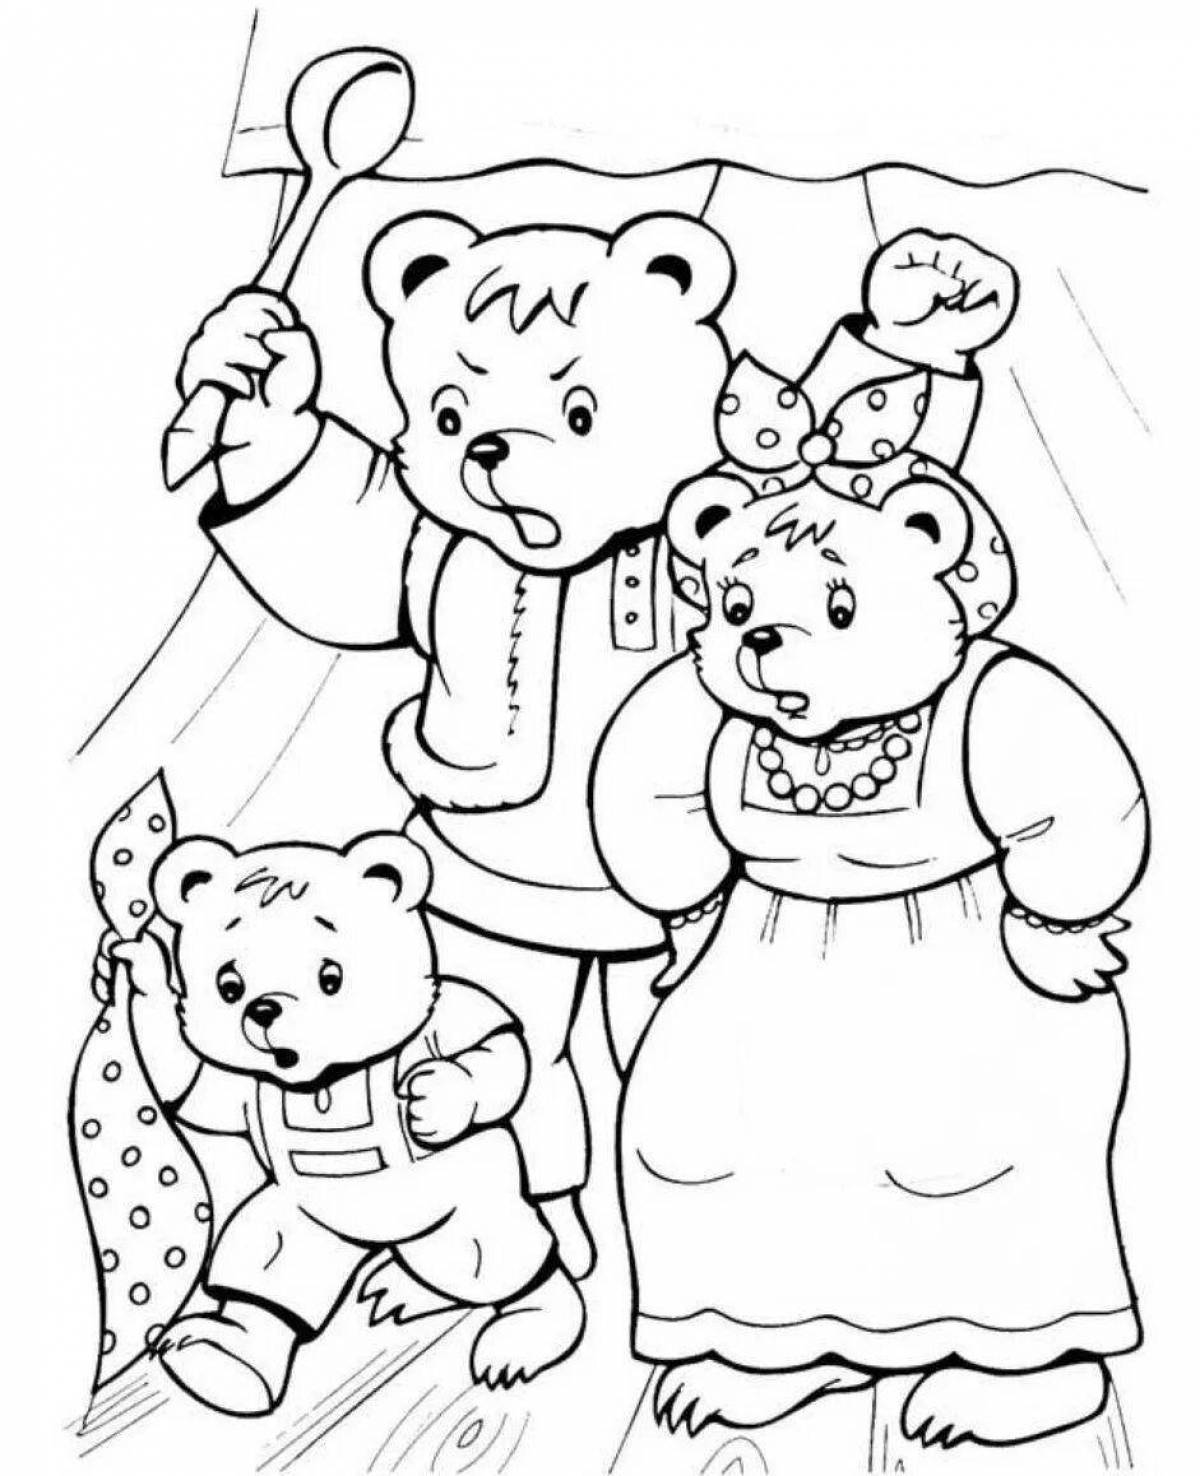 Three bears coloring page